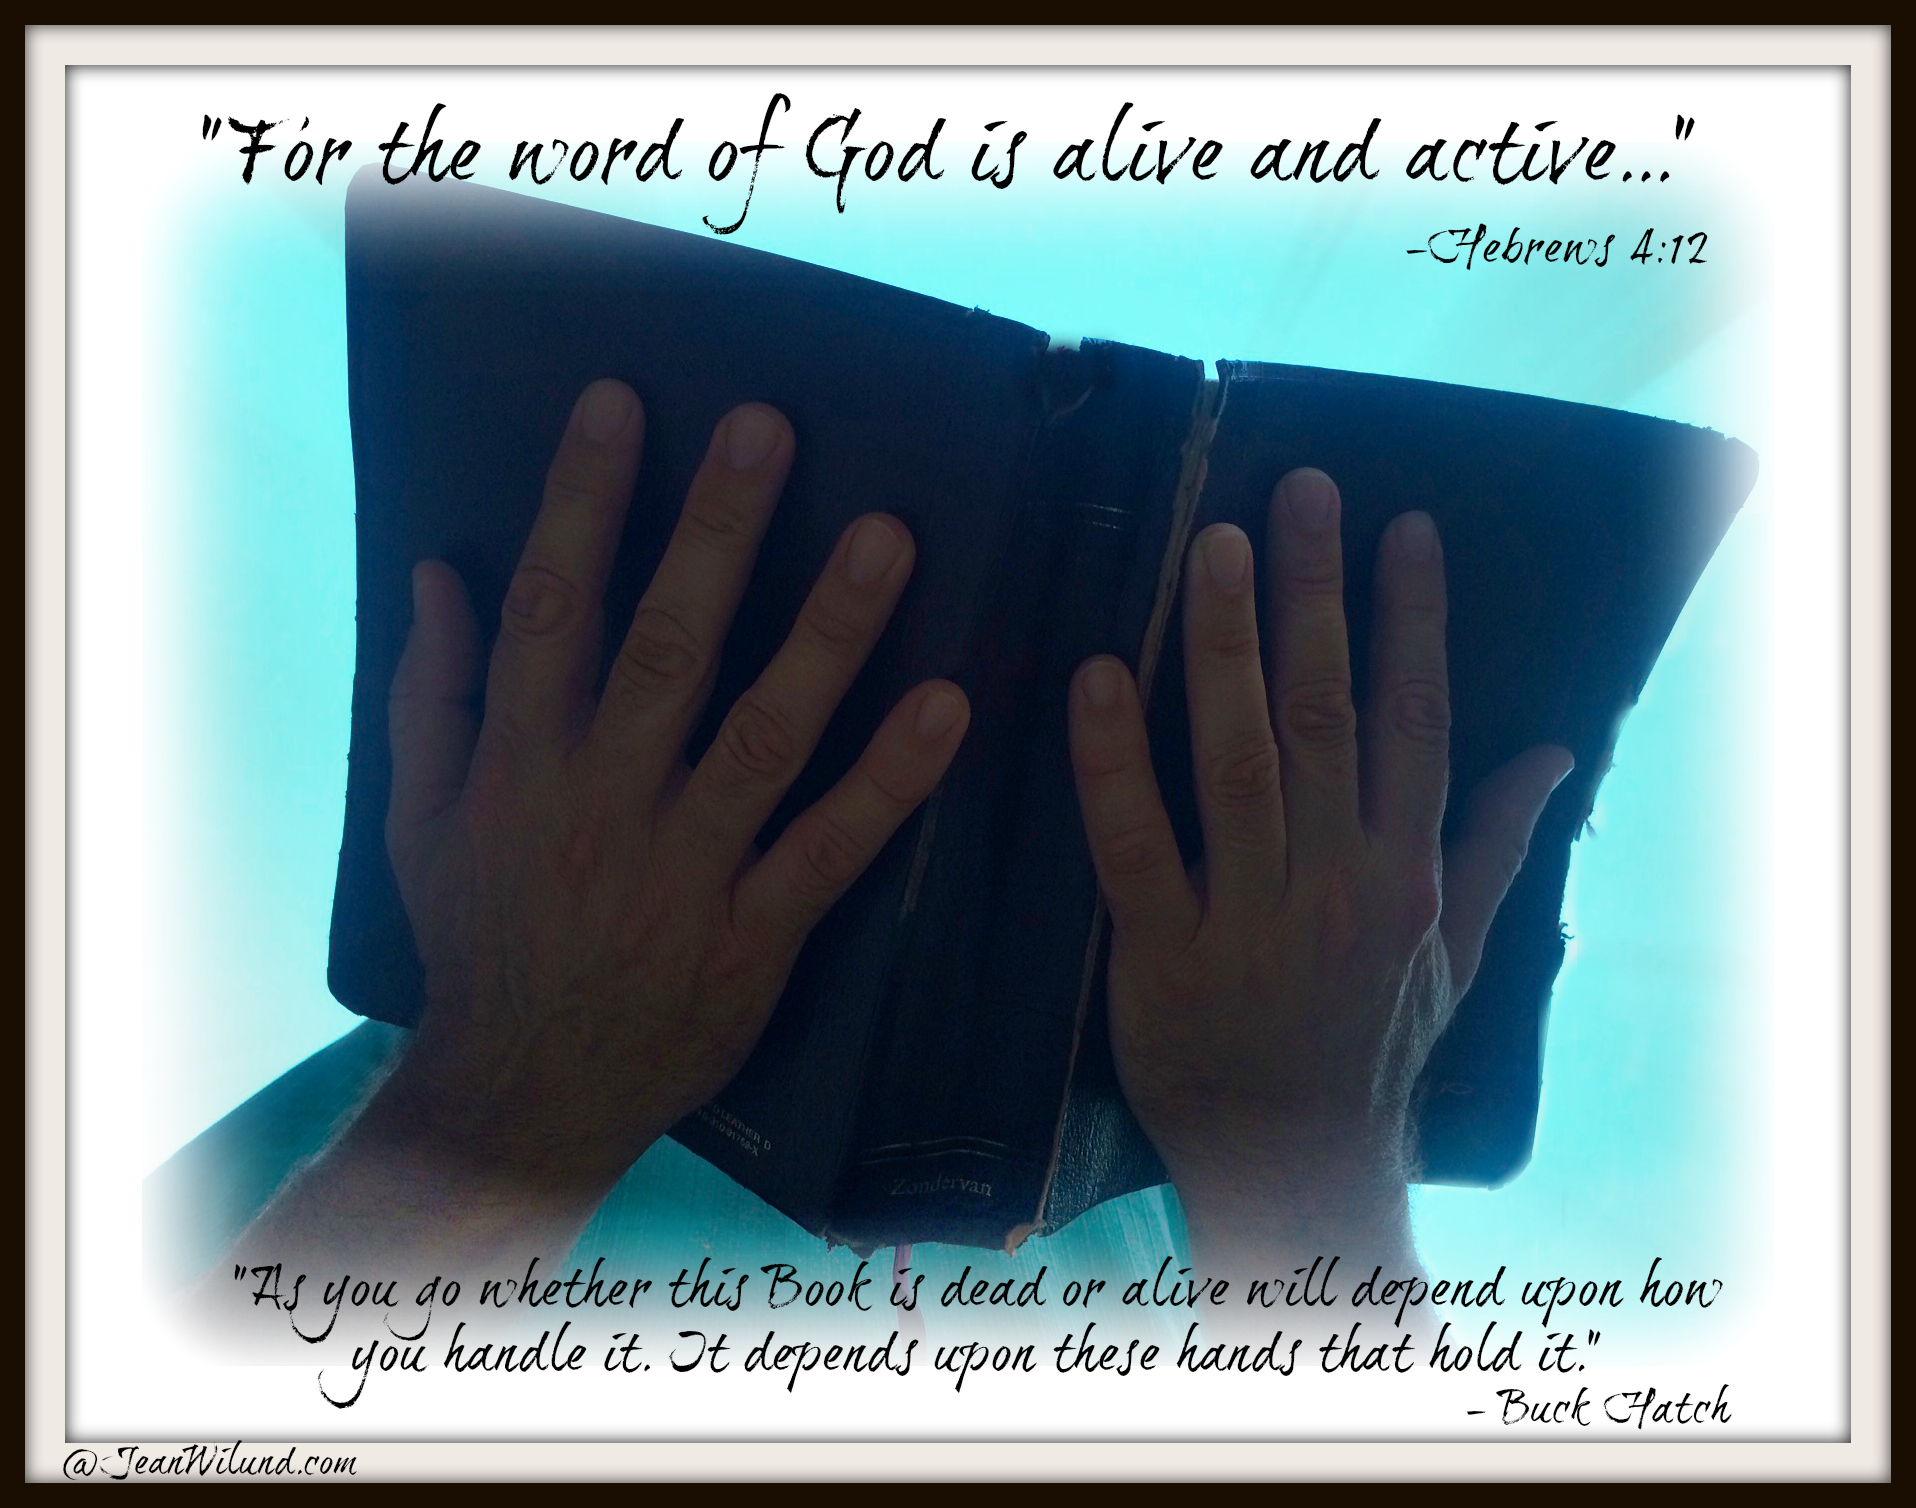 Today’s Bible Study Tip — Ten Fingers for Handling God’s Word To Keep It Active & Alive